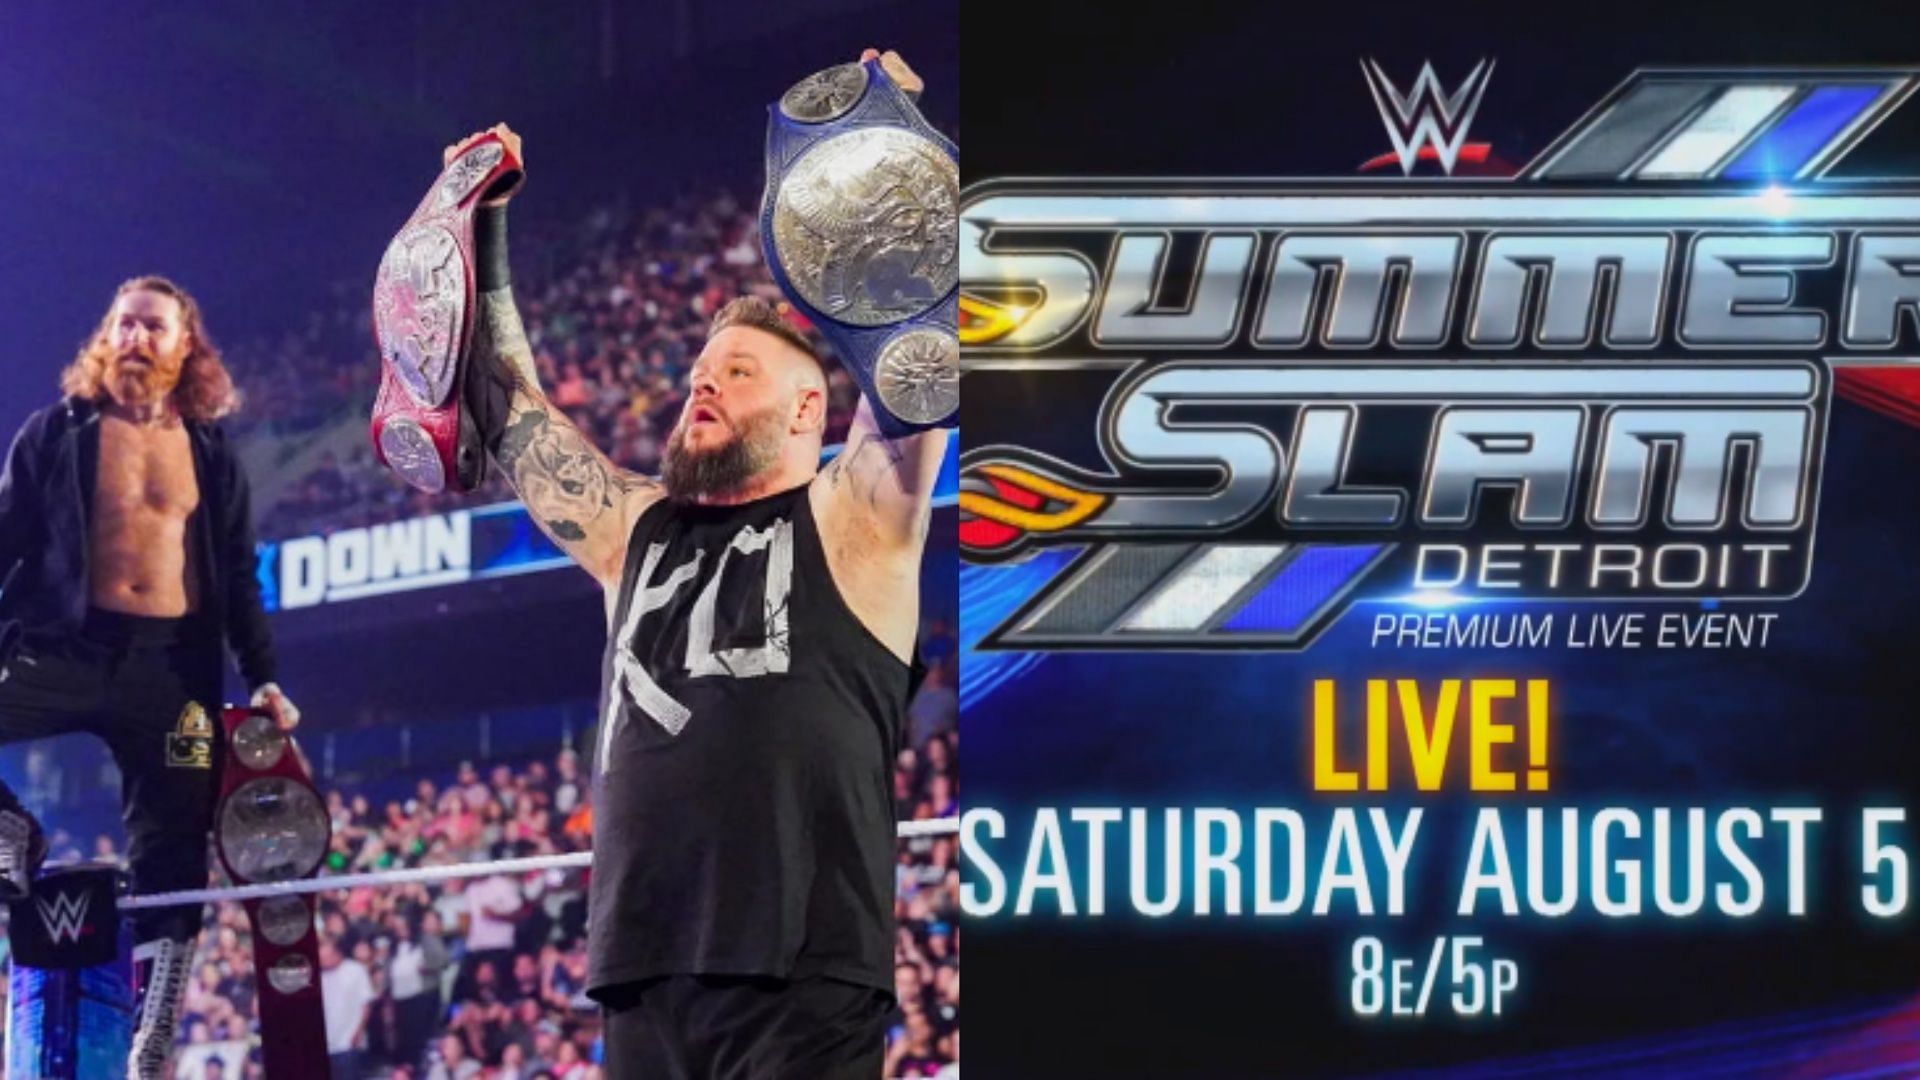 Kevin Owens and Sami Zayn are expected to defend their tag team titles at SummerSlam 2023.